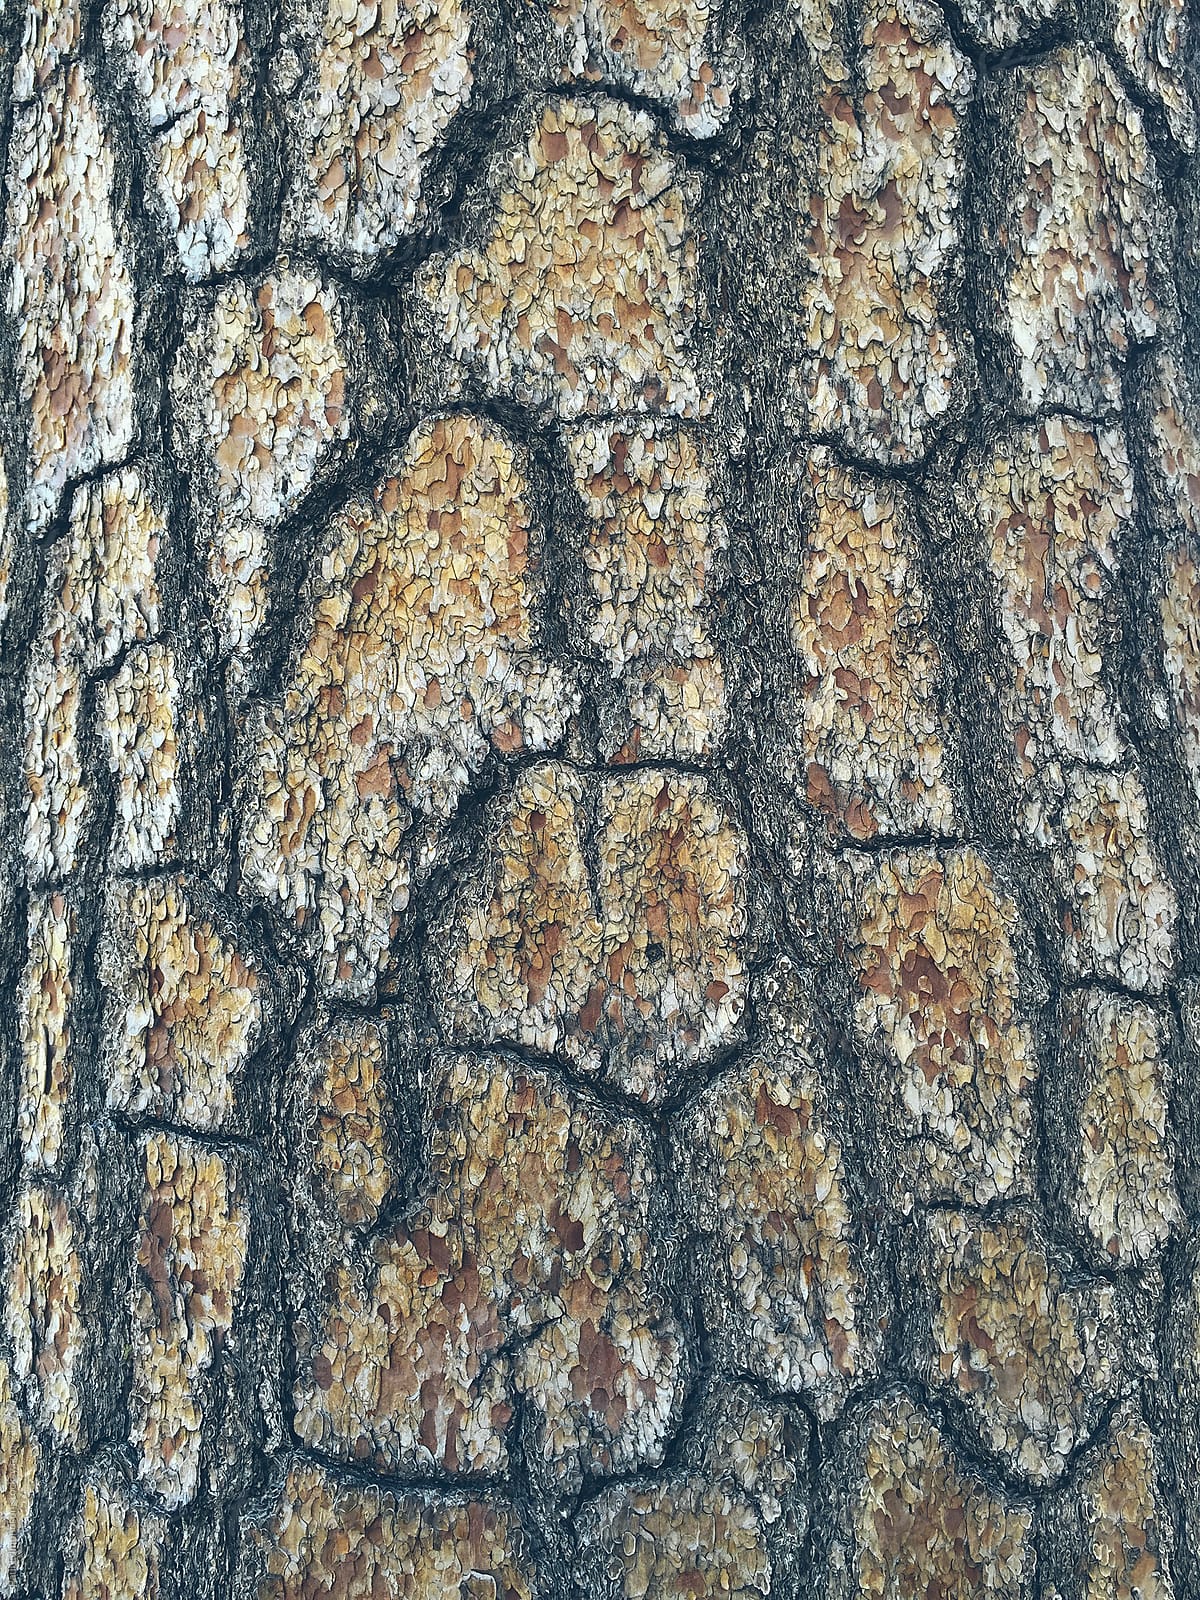 Close up of bark from old growth White pine tree